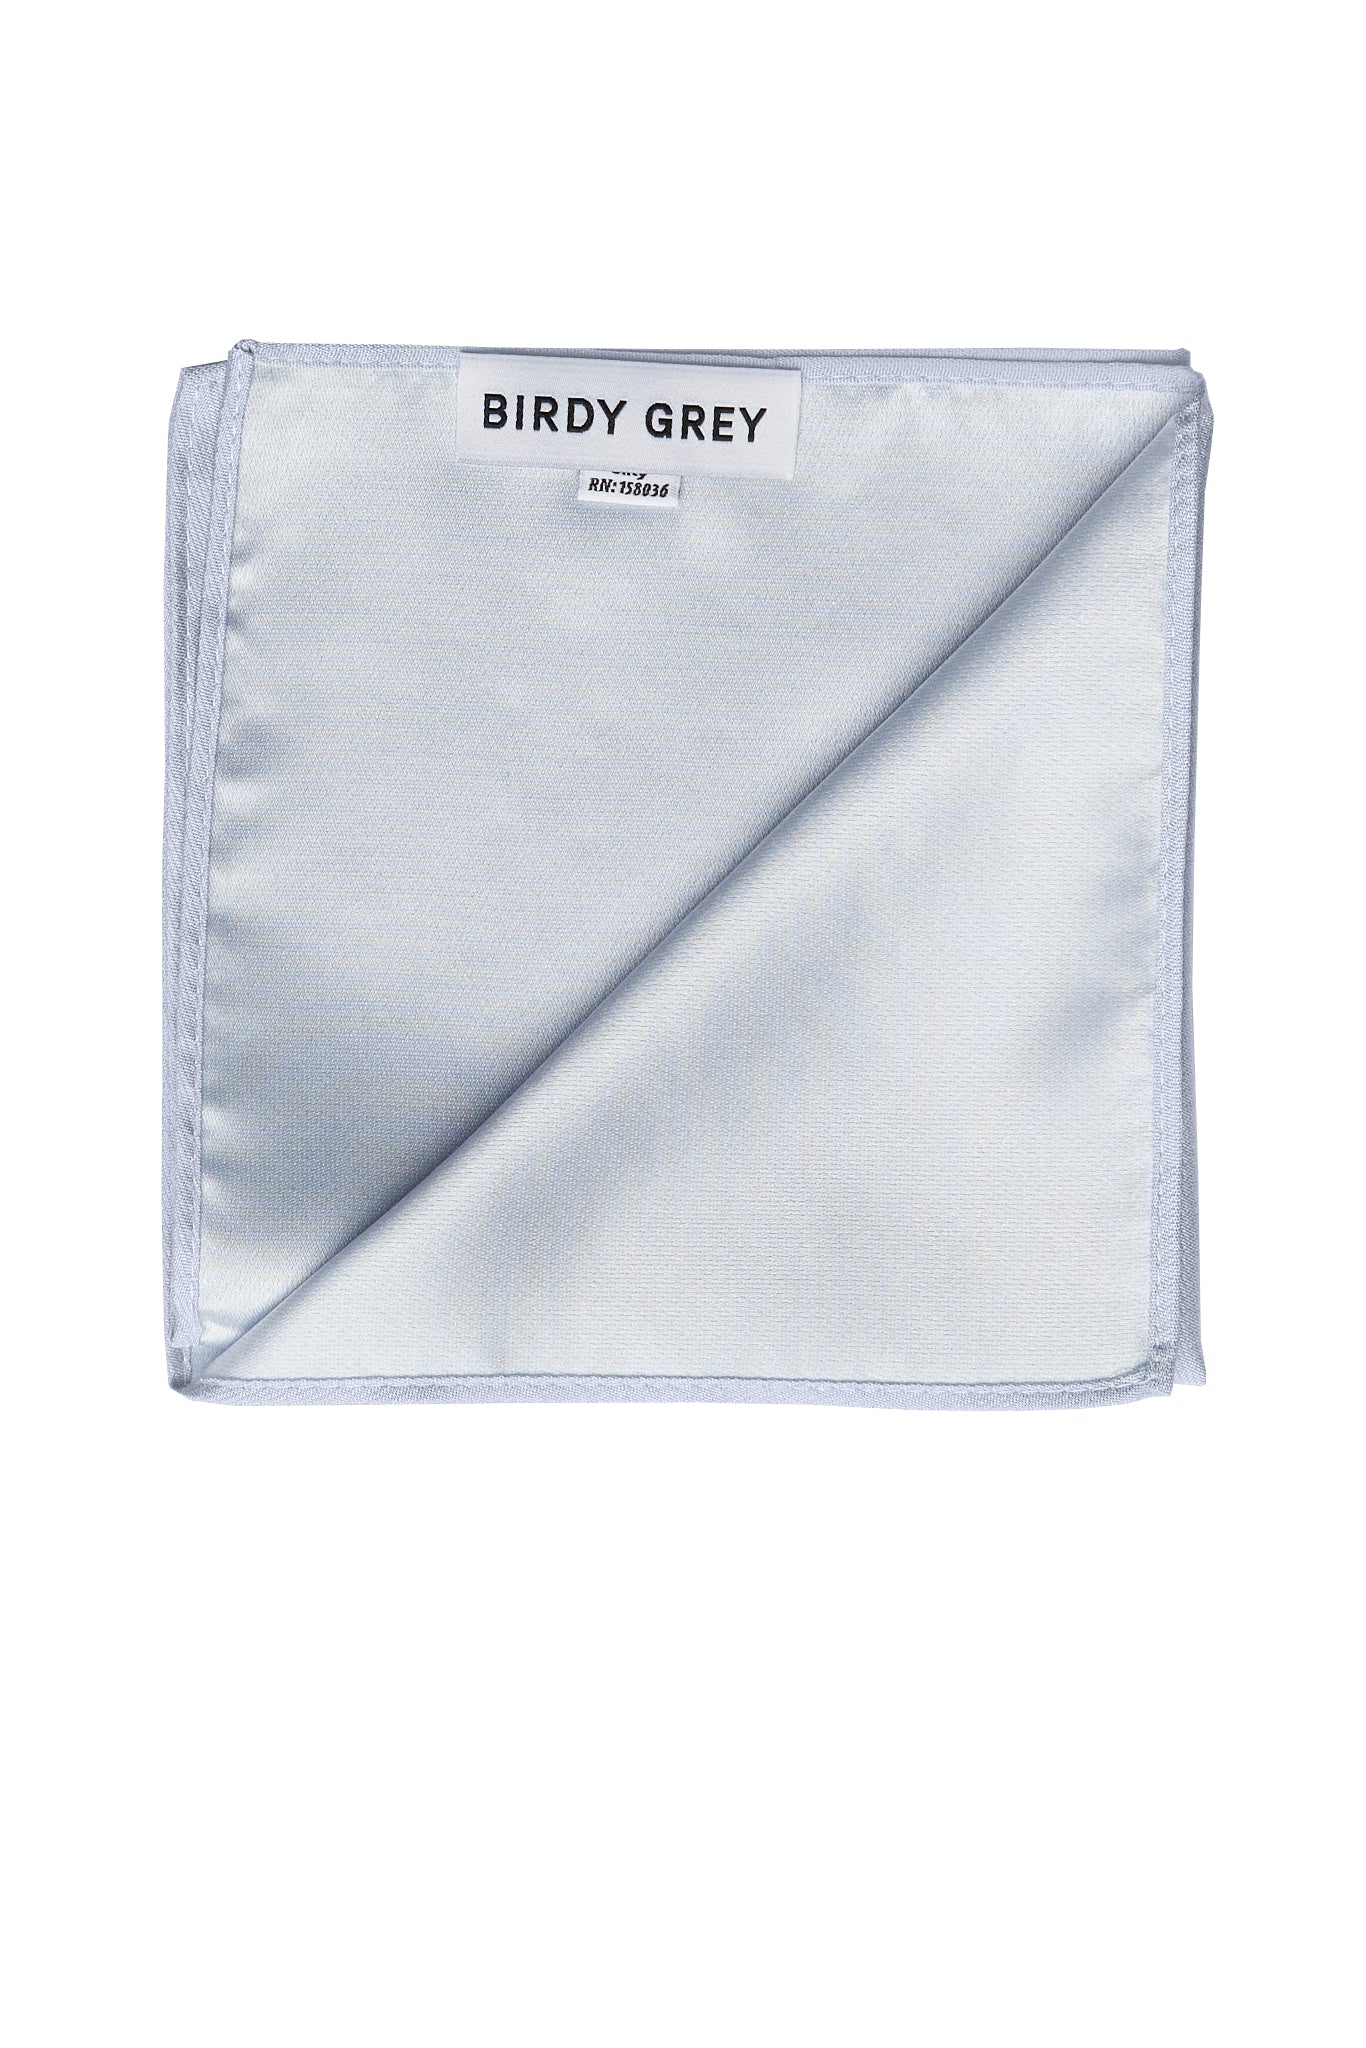 Didi Pocket Square in ice blue by Birdy Grey, interior view